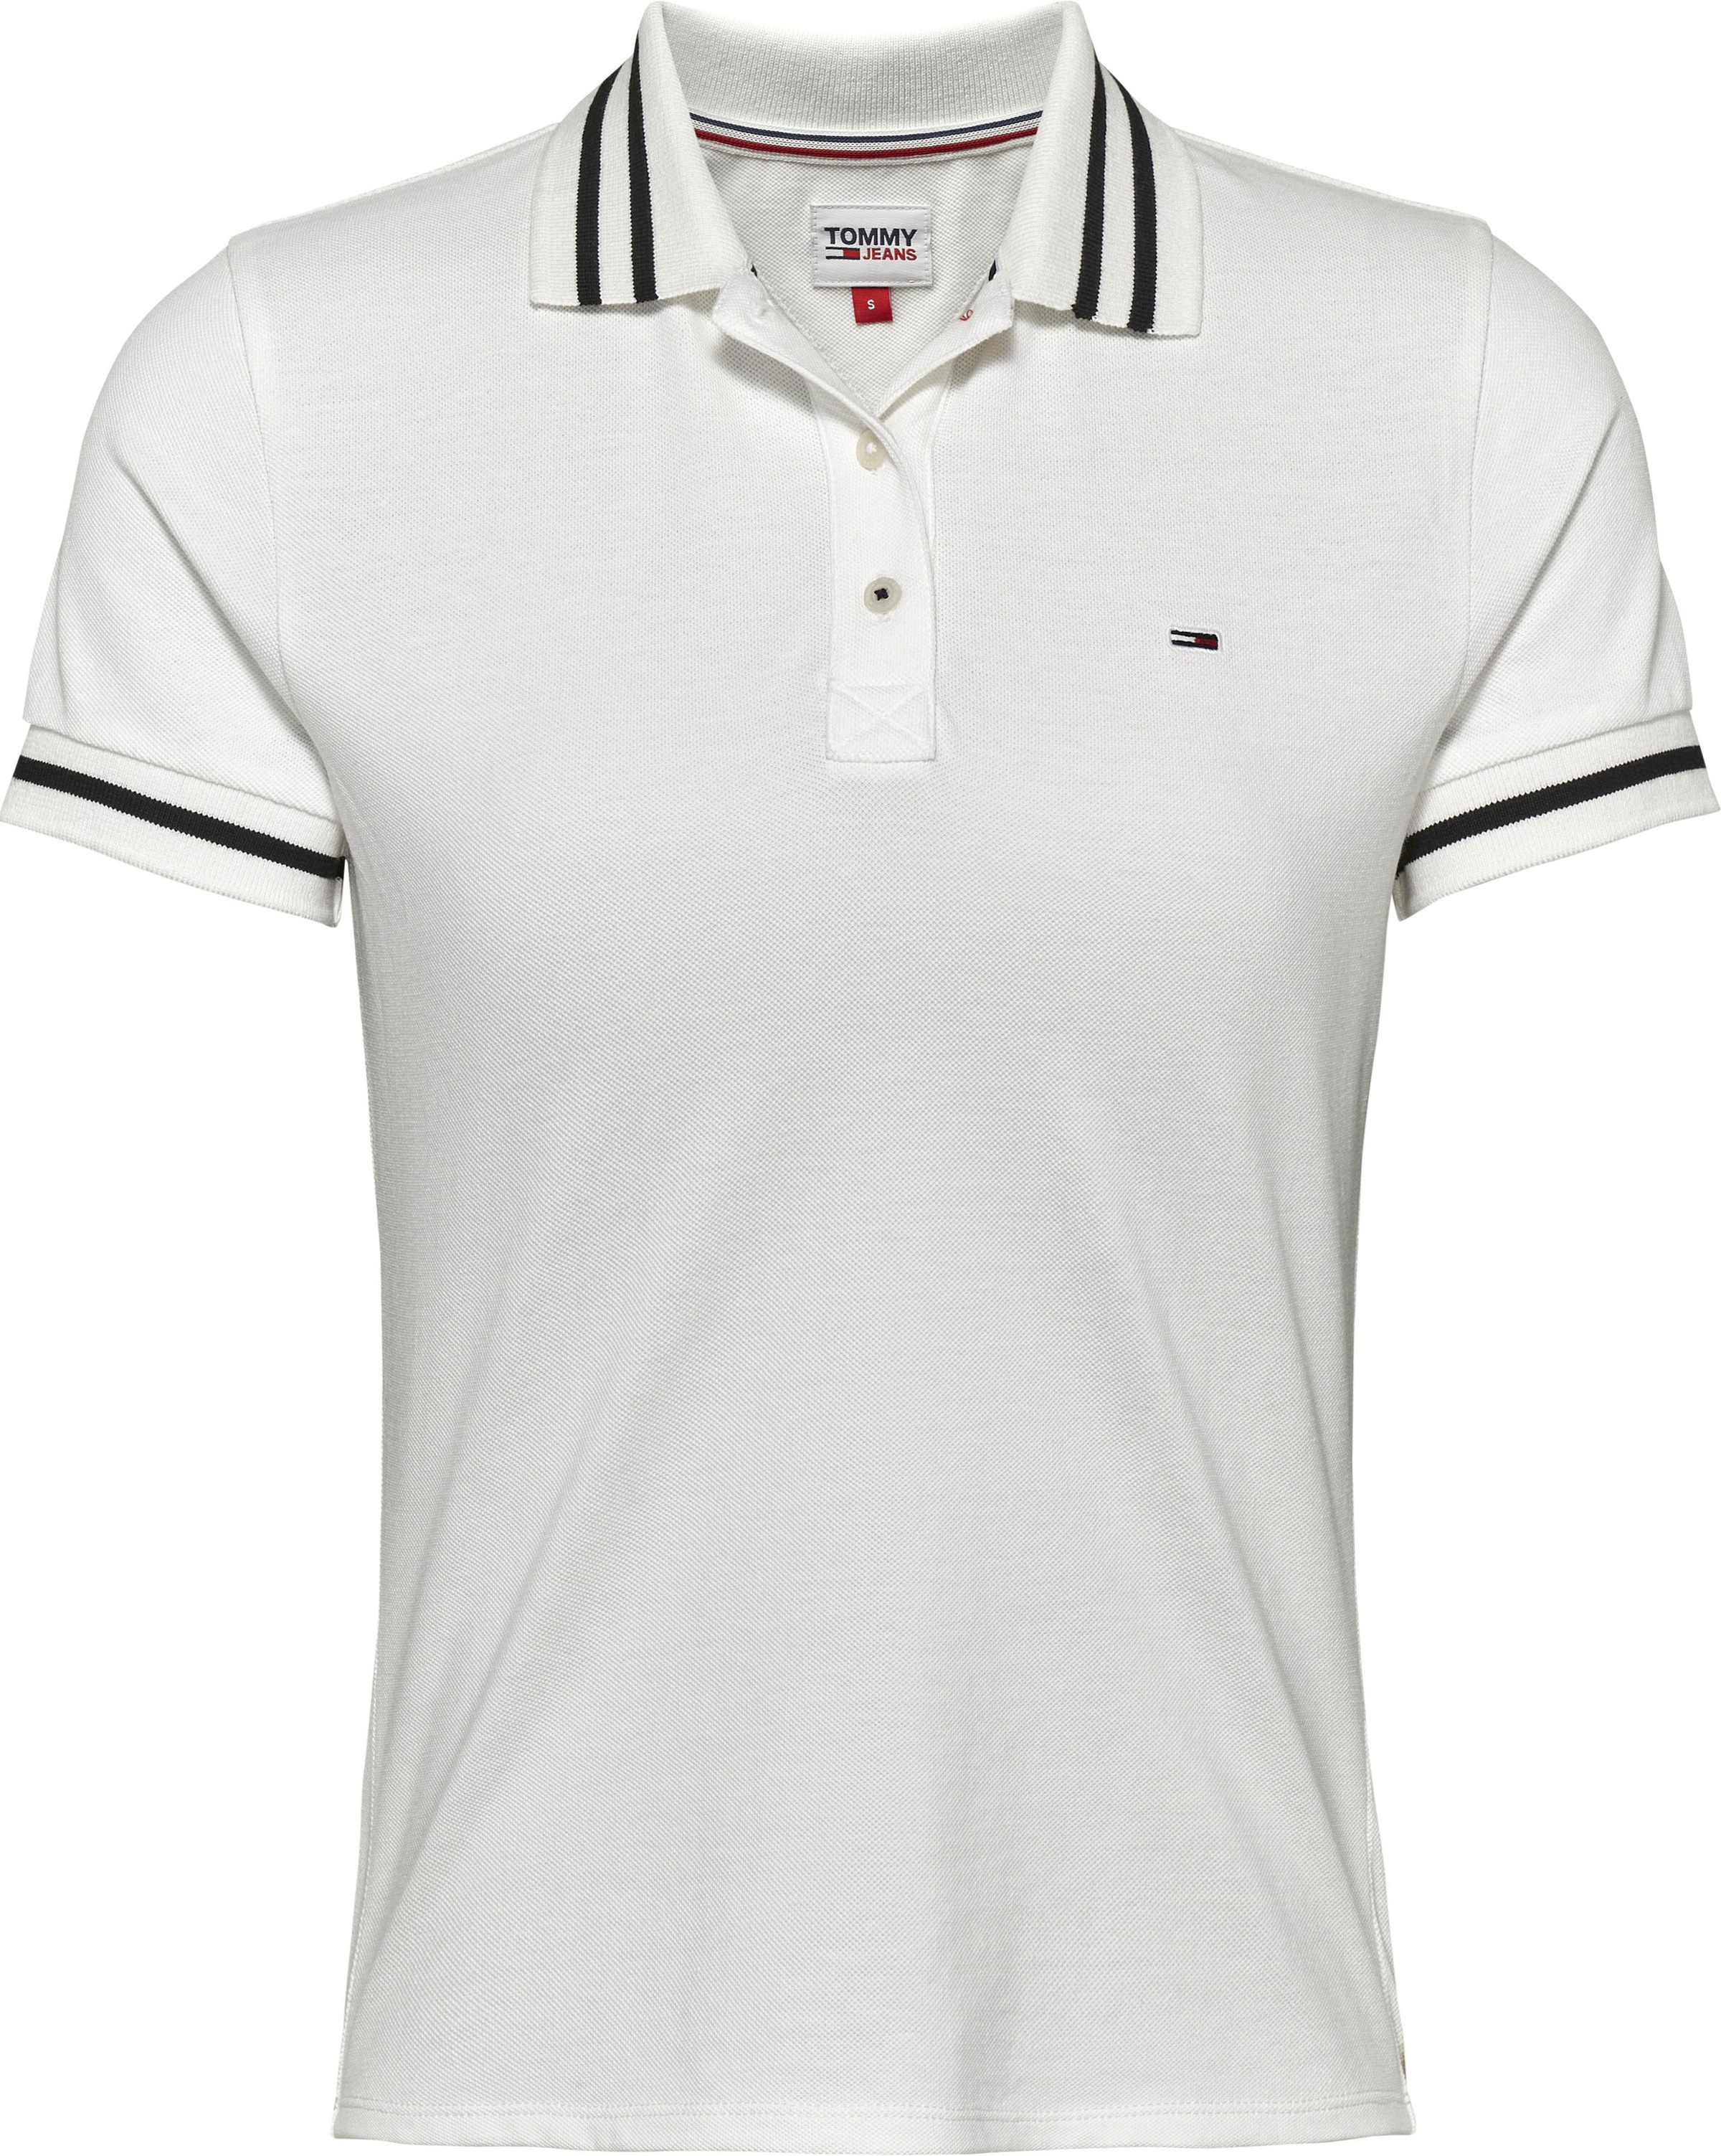 Tommy Jeans Poloshirt Kontraststreifen »TJW Jeans | POLO«, walking ESSENTIAL shoppen & TIPPING mit Tommy Label-Flag I\'m